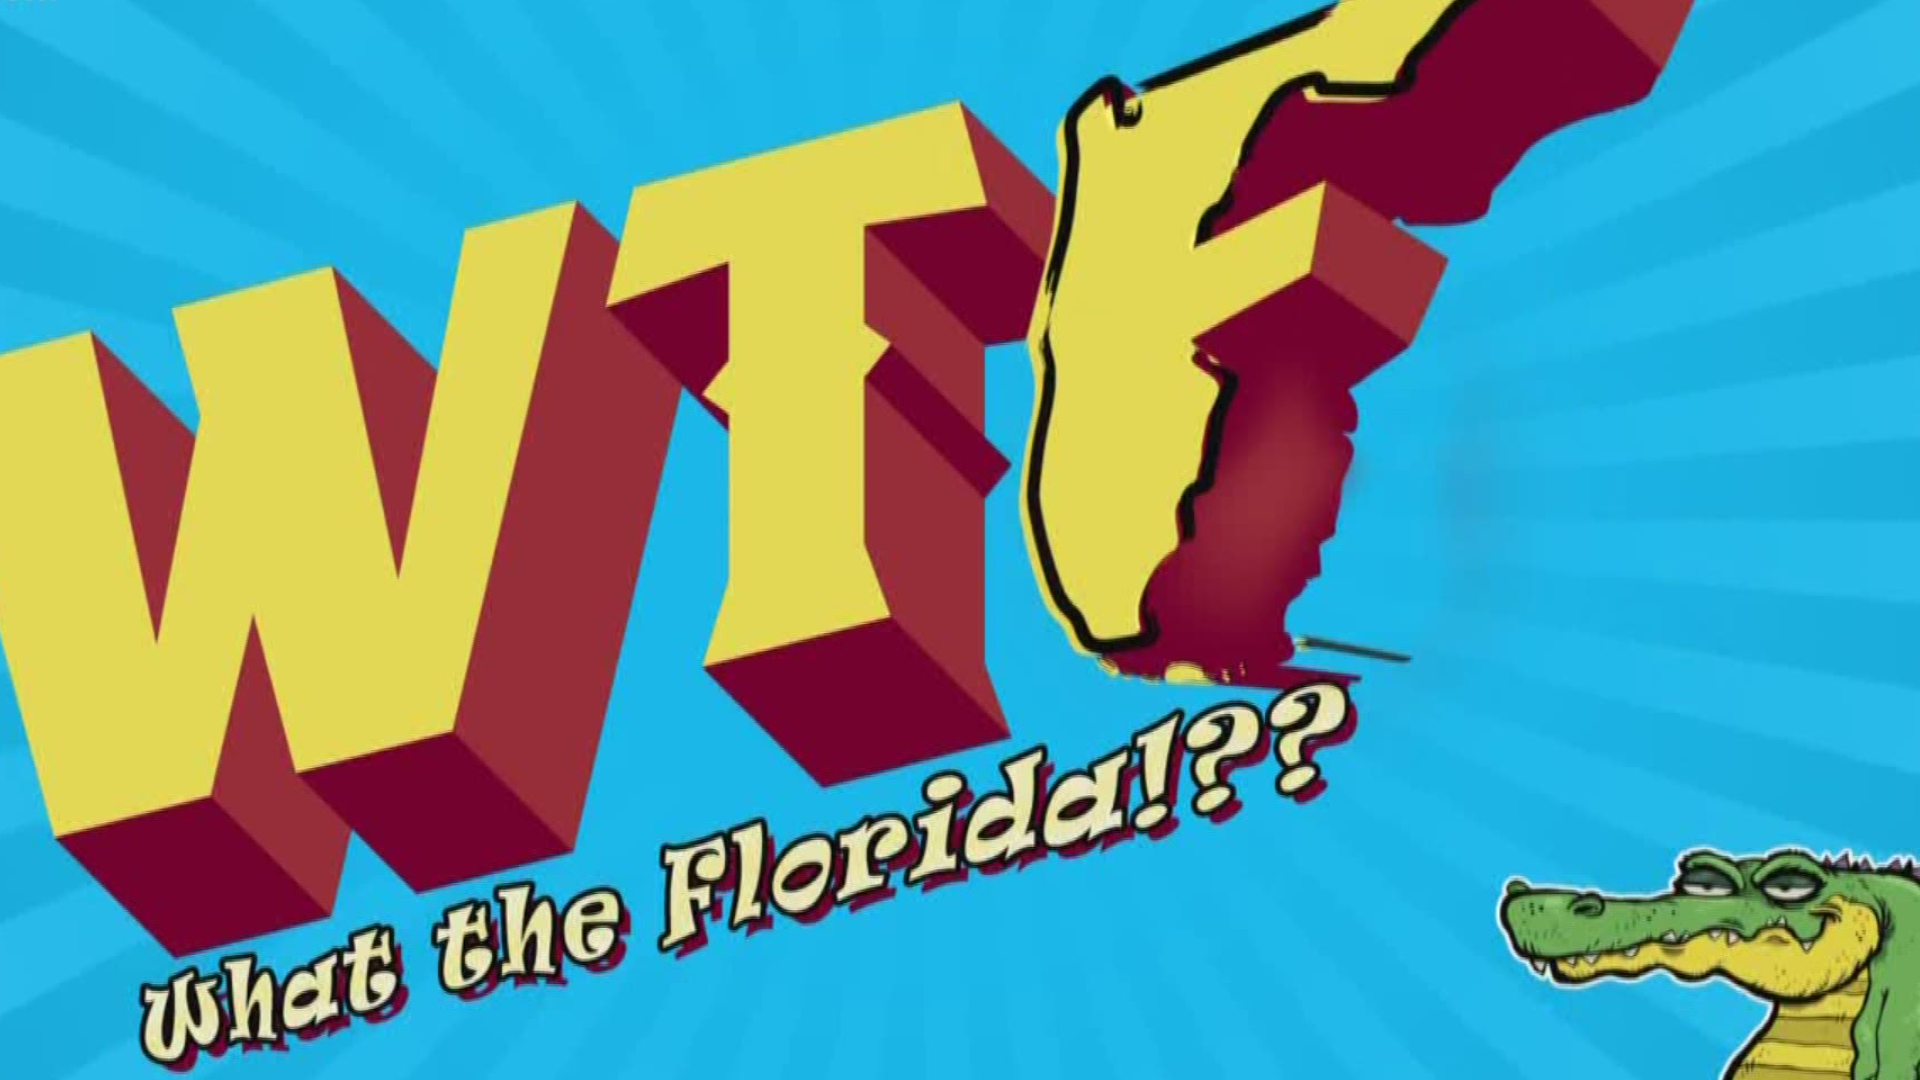 A look at which wacky Florida stories topped the headlines in 2019!